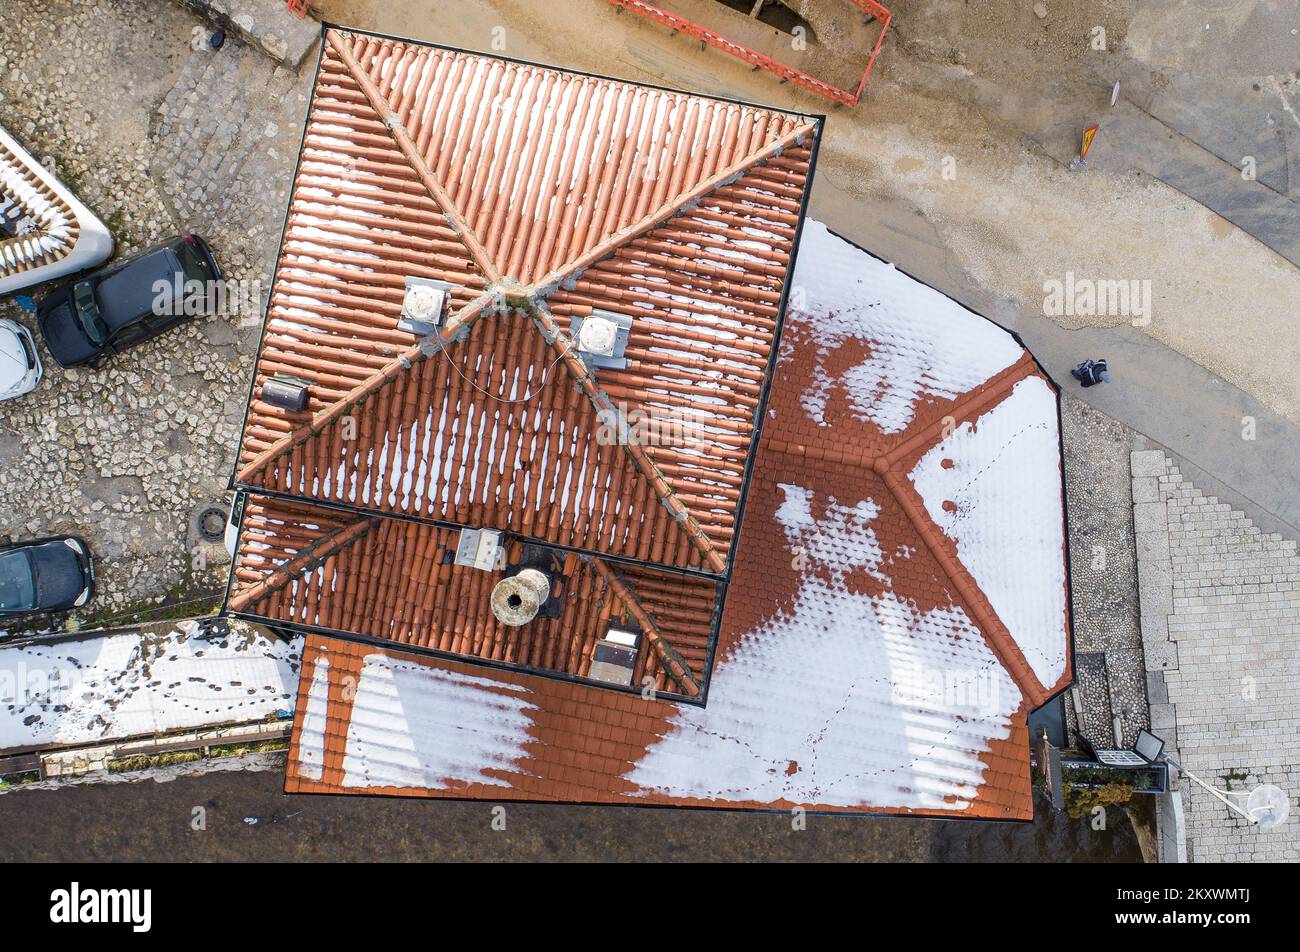 A picture taken by a drone shows Inat house (Spite house). When the location of the construction of the City Hall in Sarajevo was determined, the Austro-Hungarian authorities decided that the construction required the demolition of two restaurants and one house. The owner of the house did not allow it to be demolished for any reason. So, after long negotiations, he asked to be paid in ducats and to move his house to the other side of the coast, brick by brick. They did it and it has been called Inat House (Spite House) ever since. Today it houses a famous restaurant., in Sarajevo, Bosnia and H Stock Photo